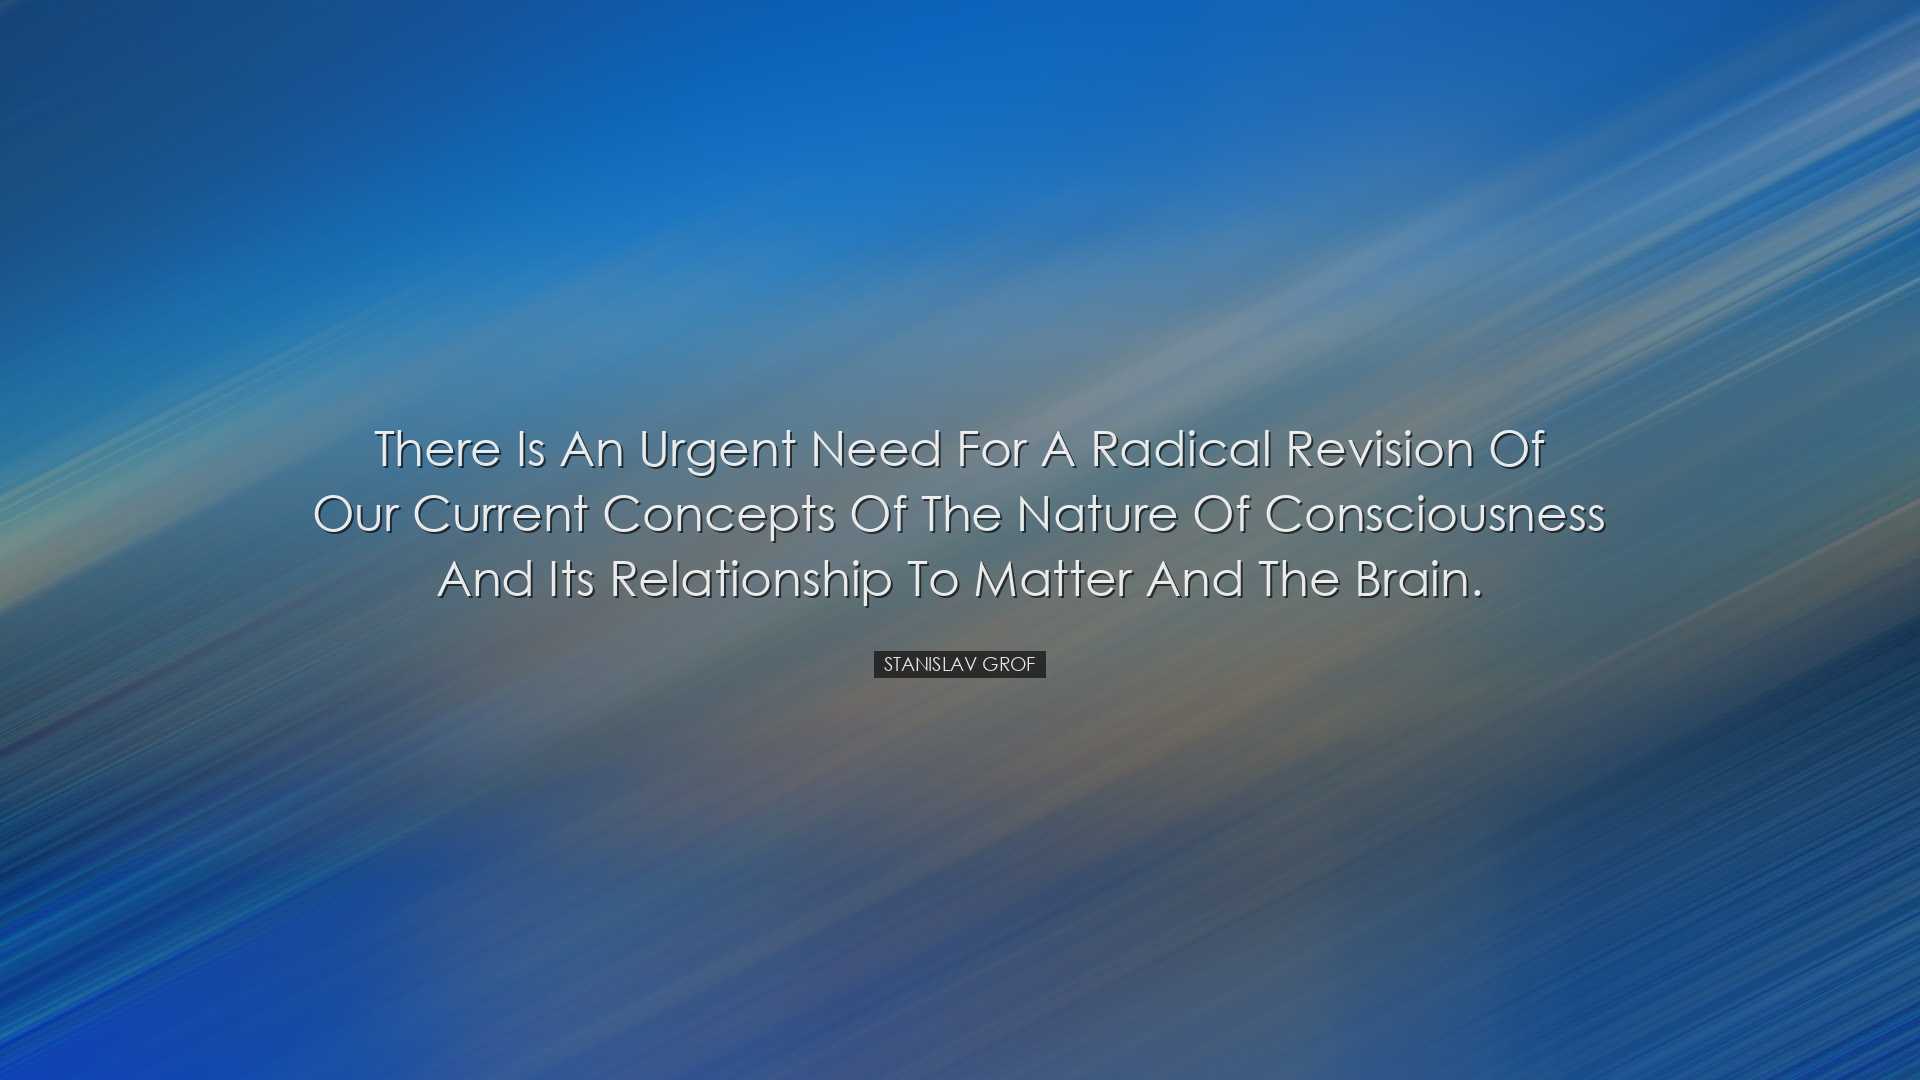 There is an urgent need for a radical revision of our current conc